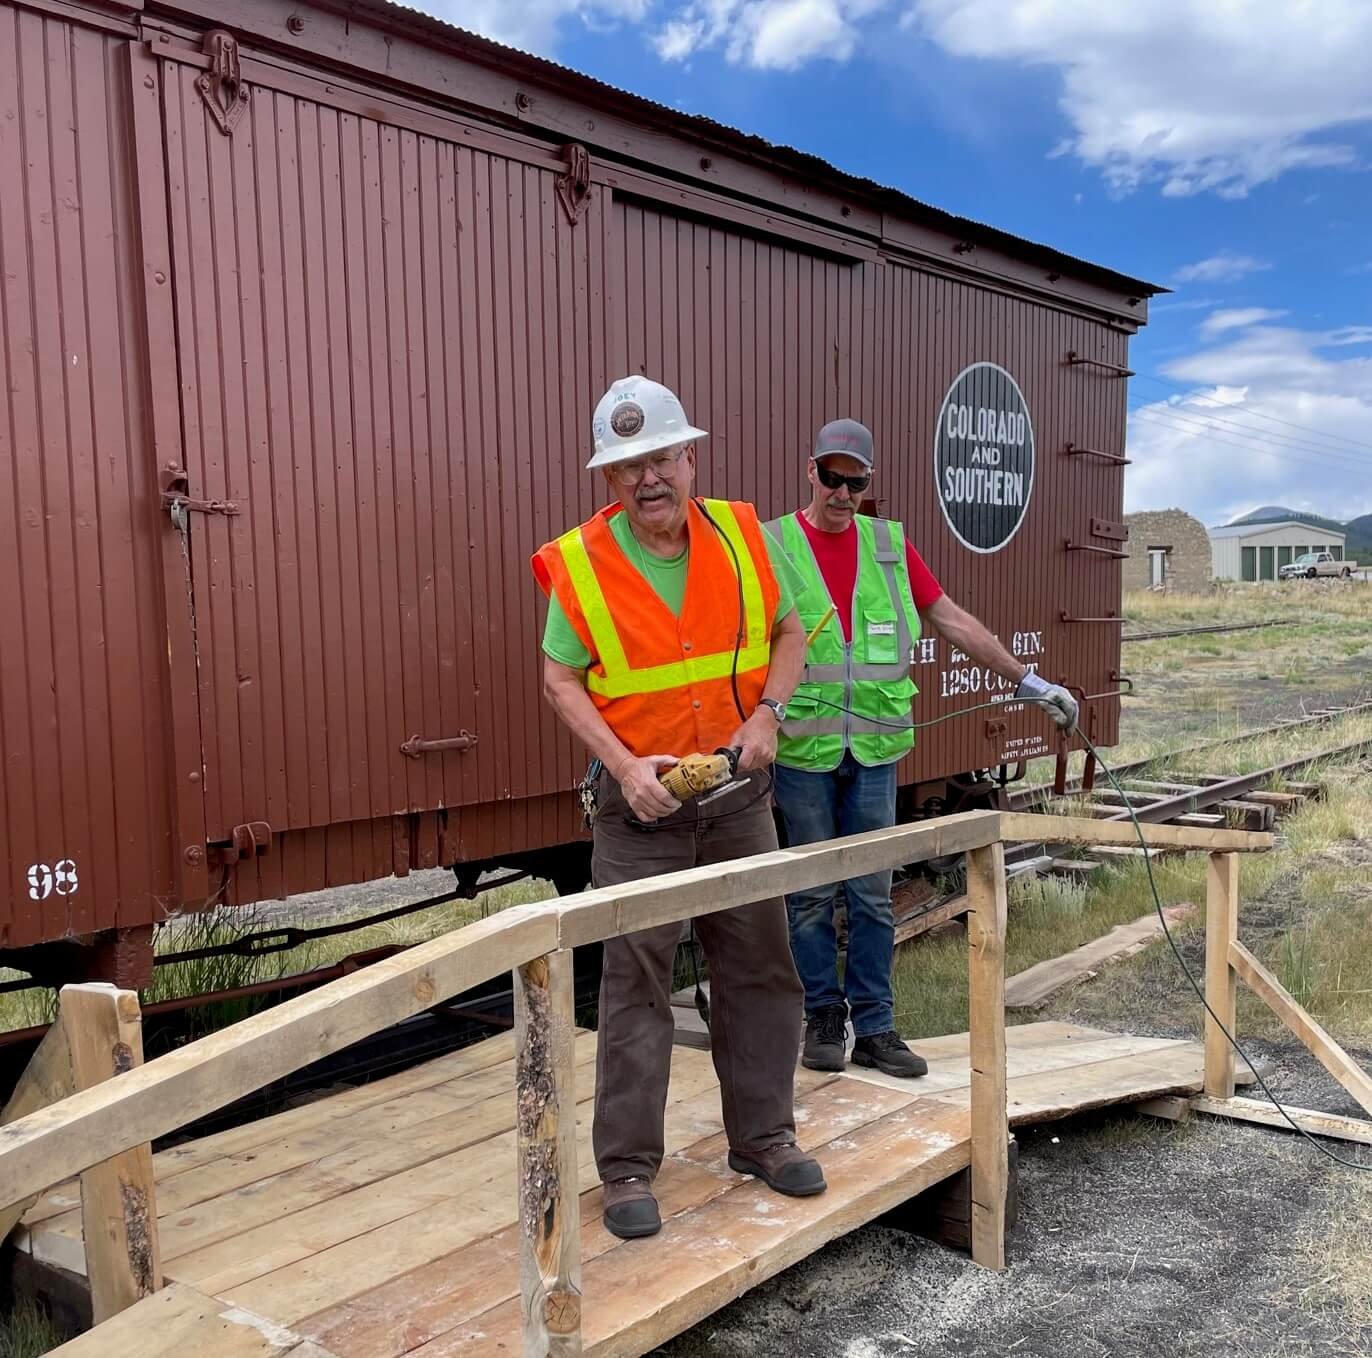  Further work continued to enhance visitor experience of archeological history on the Como Heritage site with Joey Knous and Clark Stemke constructing a visitor ramp to view the archival collection and the relocation of C&amp;S Boxcar #8027under the 